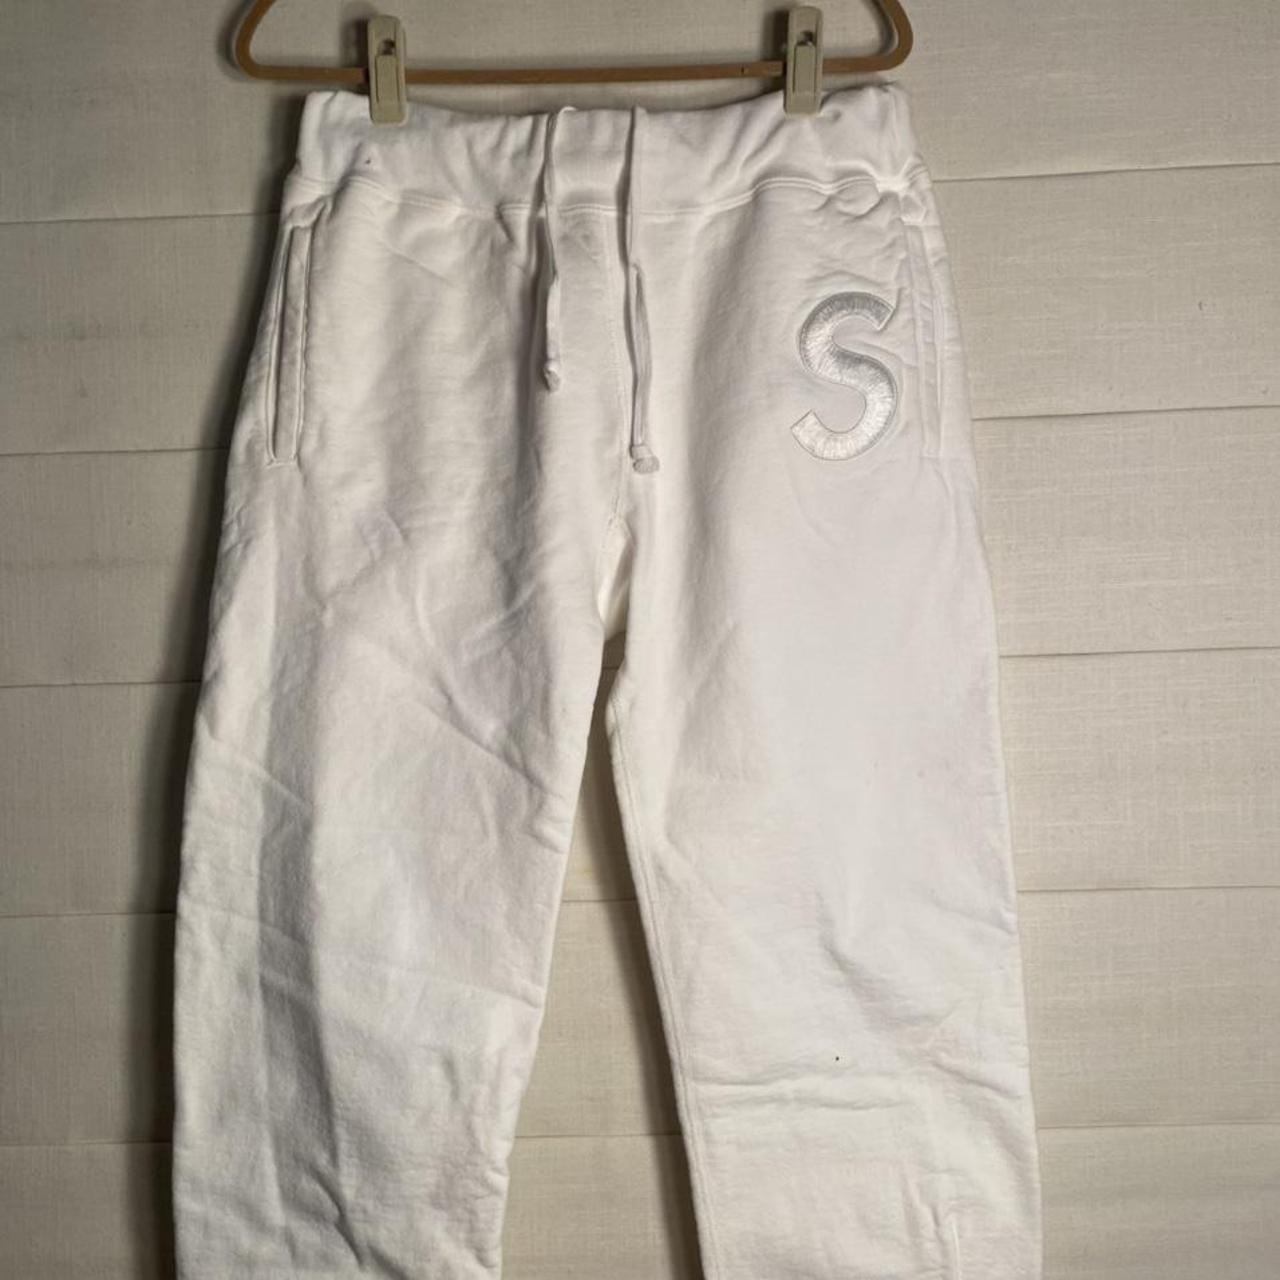 Rare Supreme “S” sweatpants. By rare, I mean there... - Depop